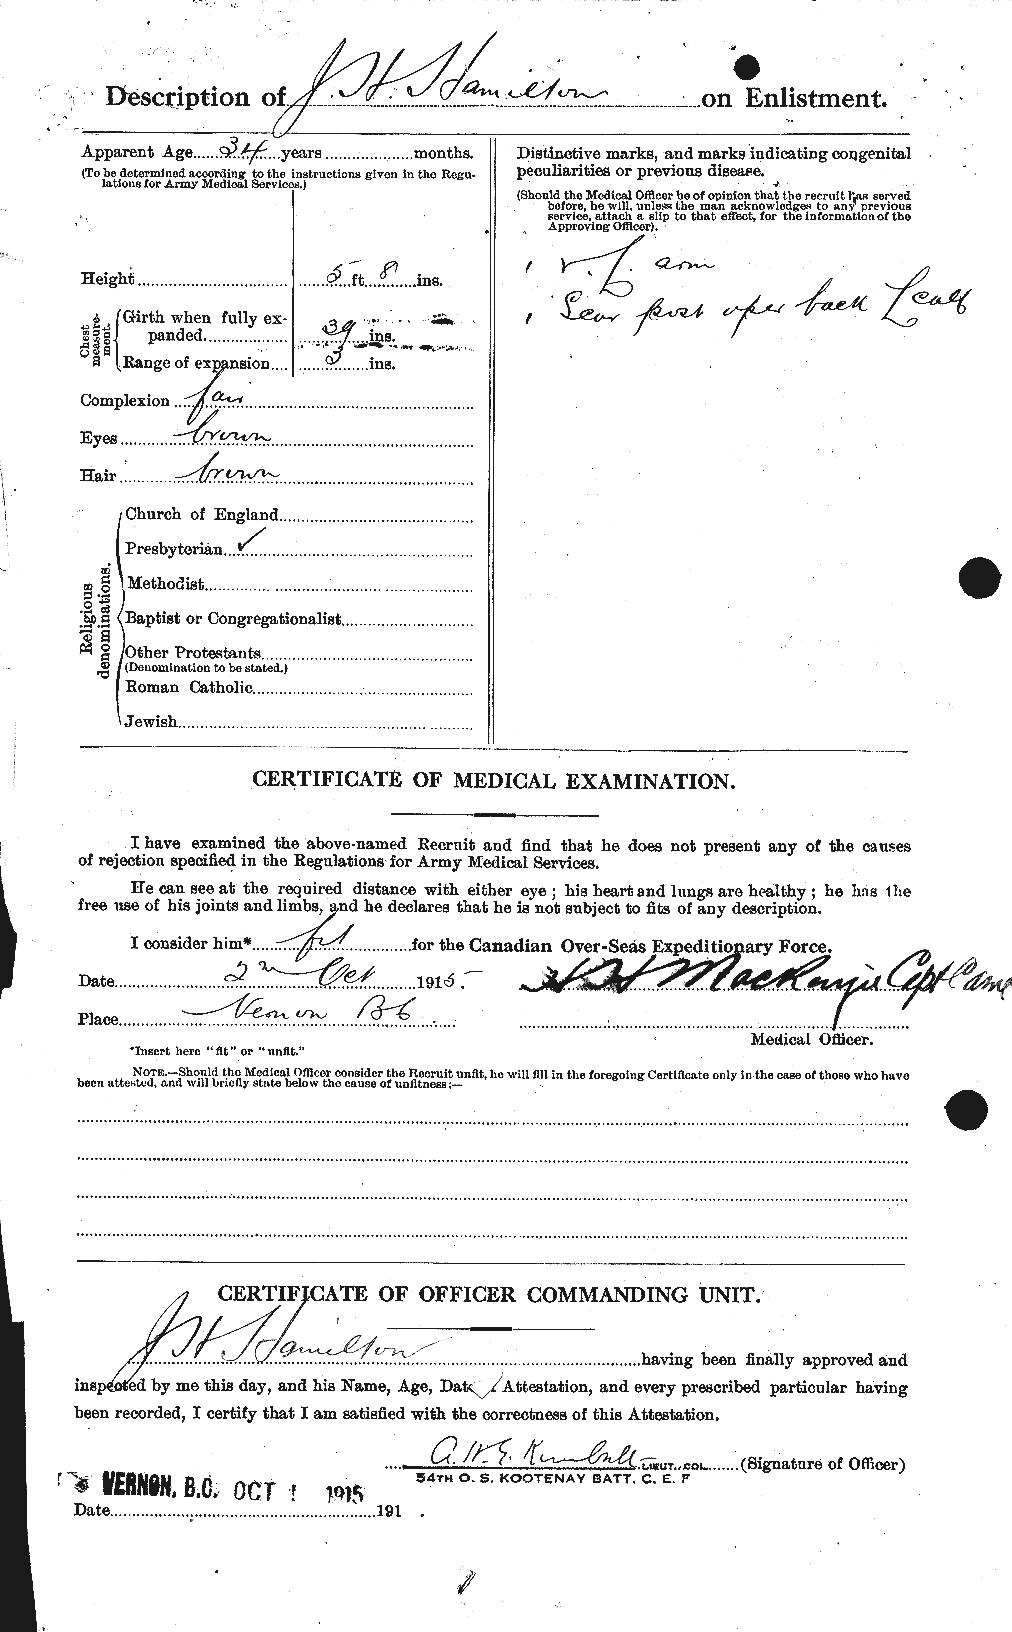 Personnel Records of the First World War - CEF 372983b